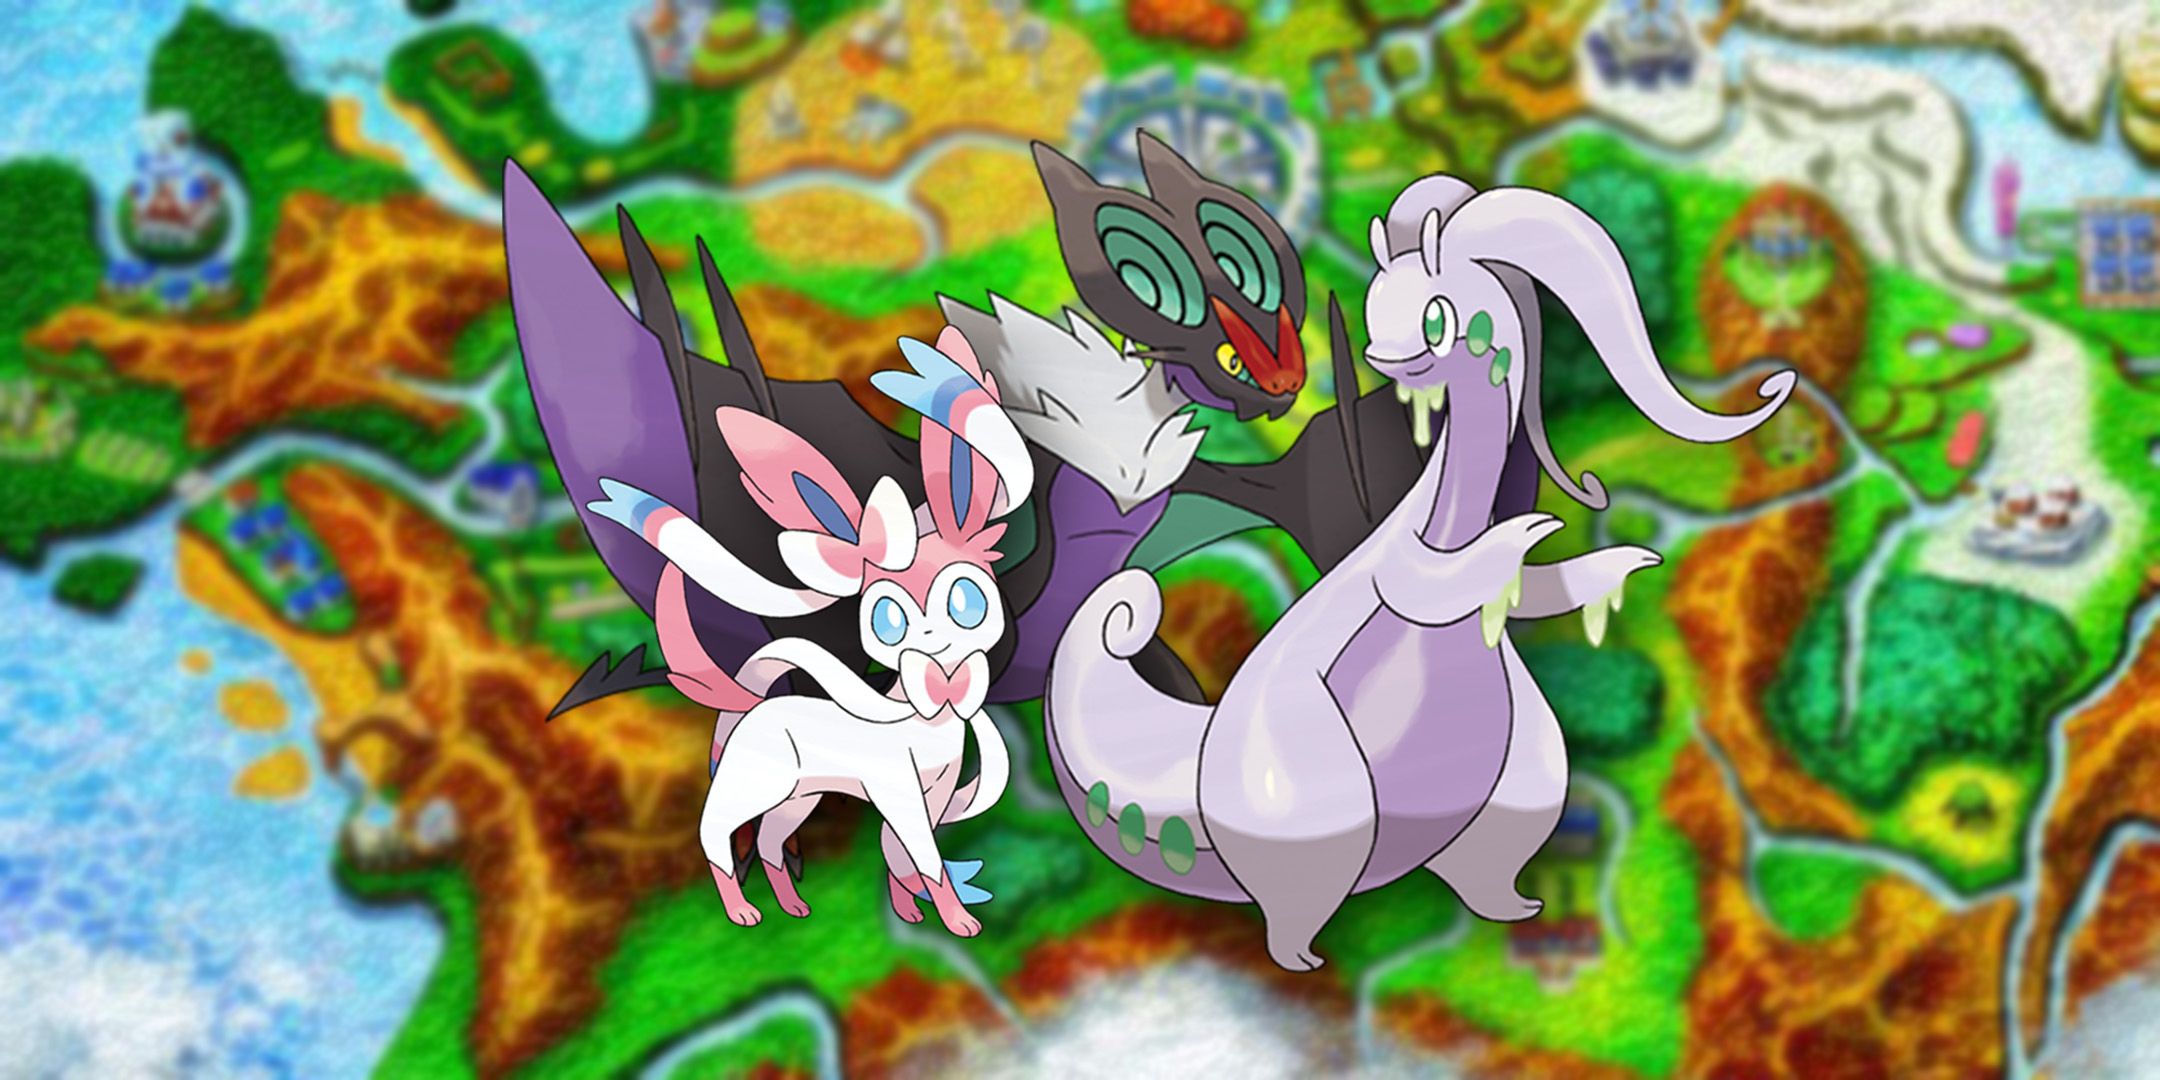 Sylveon, Noivern, and Goodra standing in front of a map of the Kalos region